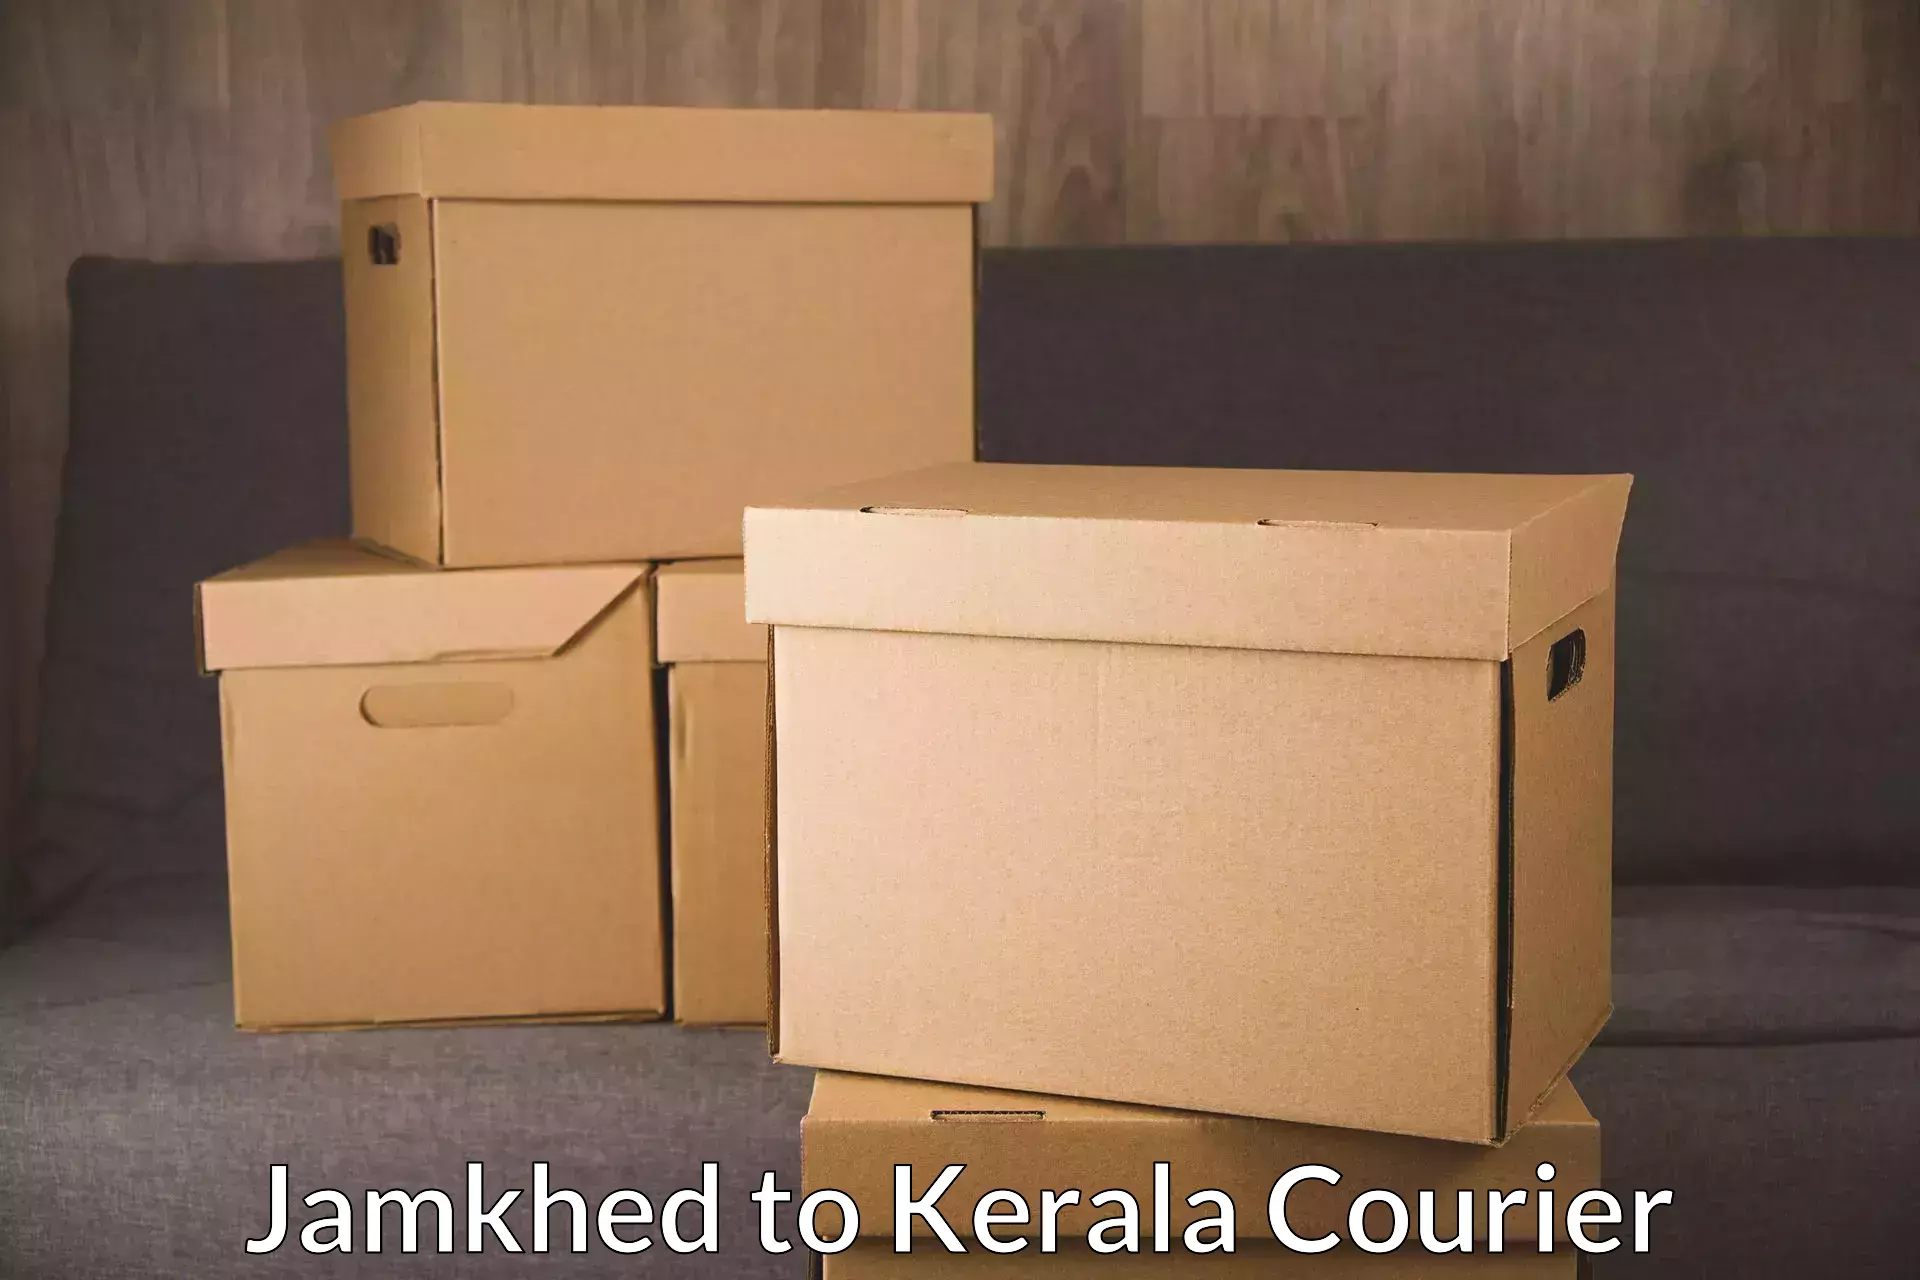 Nationwide delivery network Jamkhed to Kerala